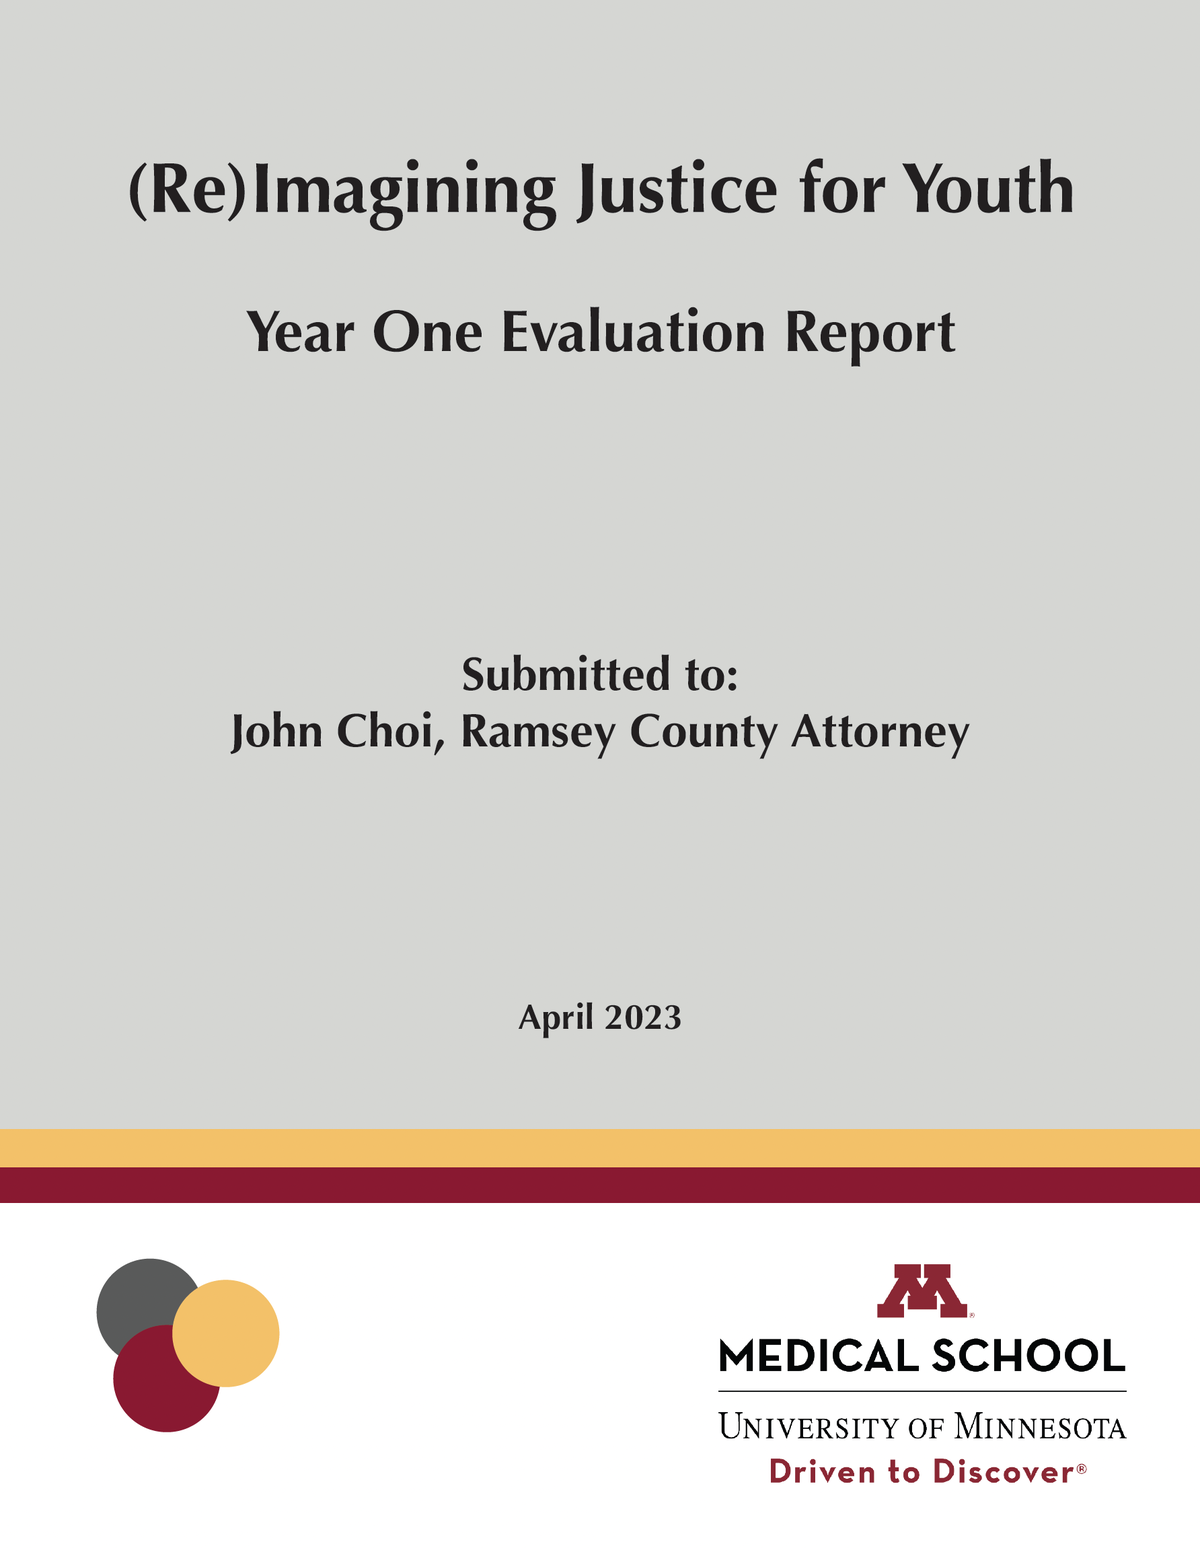 (Re)Imagining Justice for Youth YR 1 Report